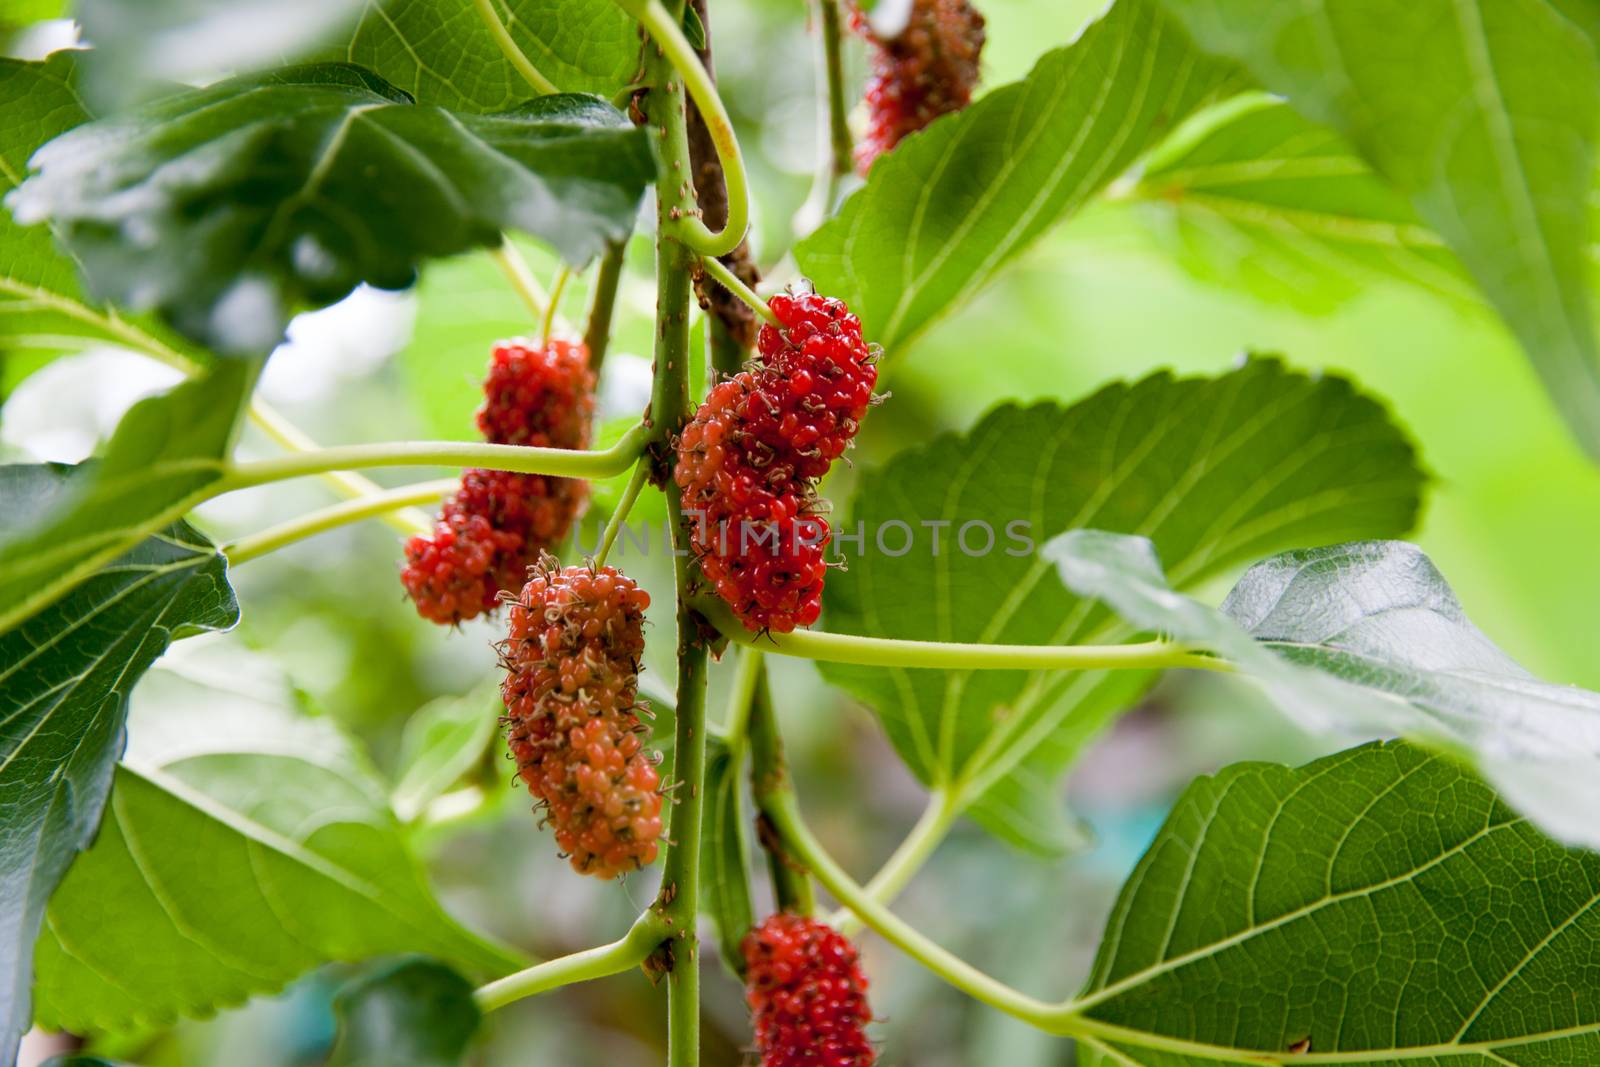 Mulberry fruit and green leaves by PeachLoveU